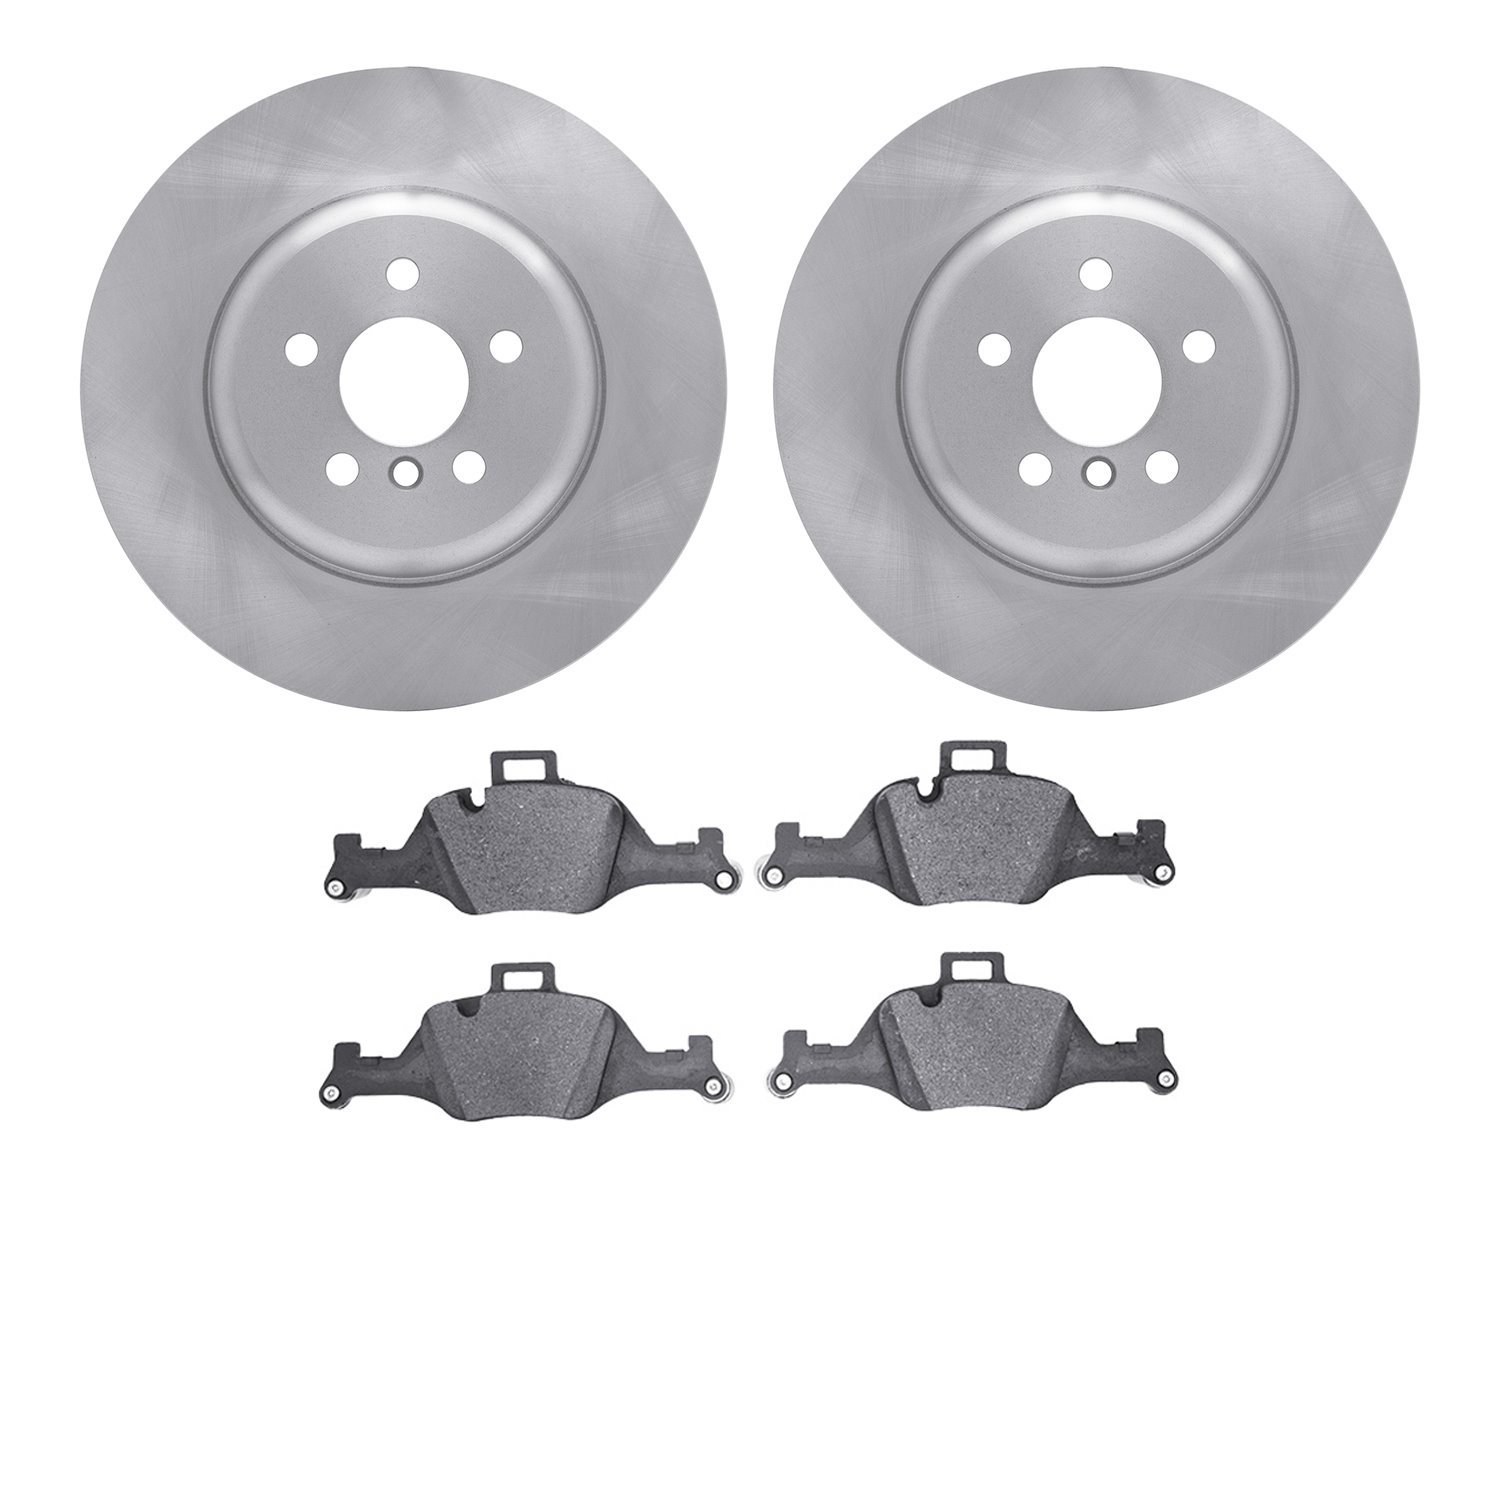 6302-31140 Brake Rotors with 3000-Series Ceramic Brake Pads Kit, Fits Select BMW, Position: Front